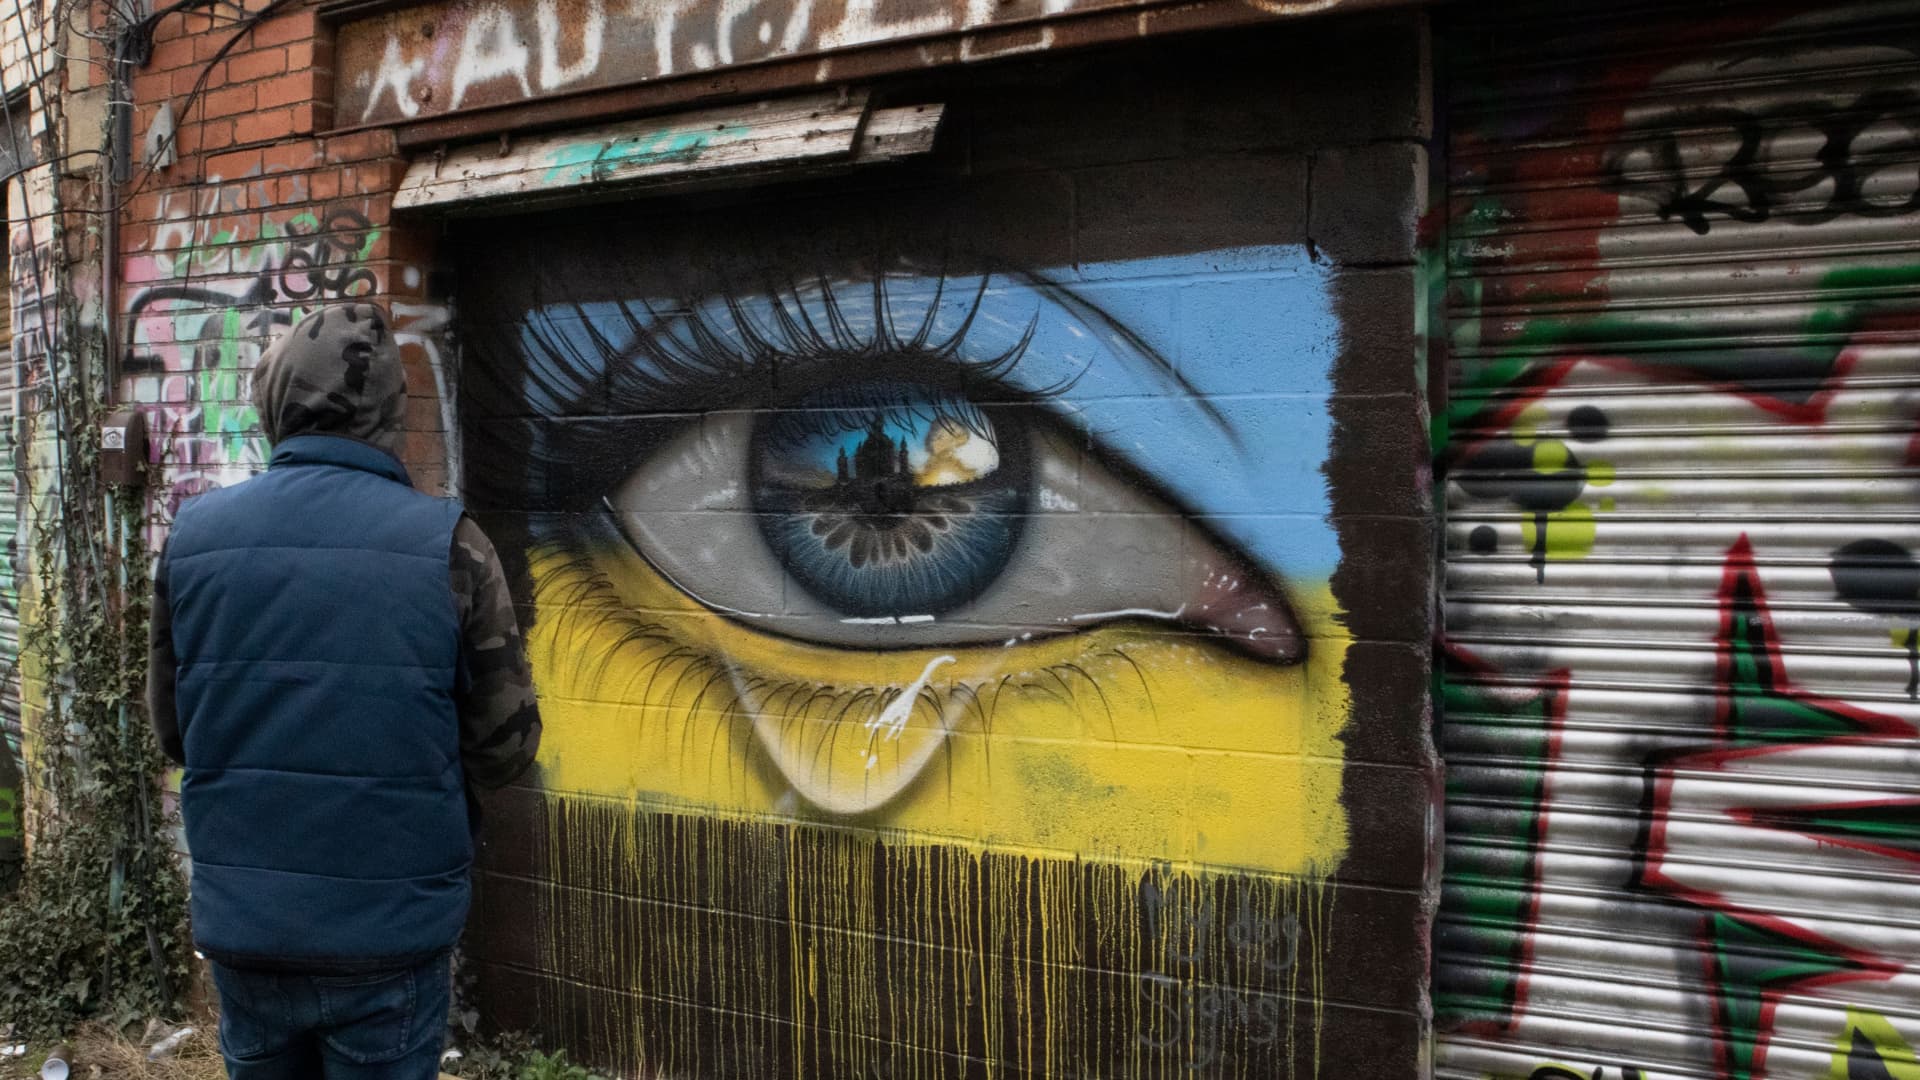 A resident looks at new street art mural has appeared in Cardiff depicting Ukraine's capital Kyiv under siege on March 01, 2022 in Cardiff, Wales.